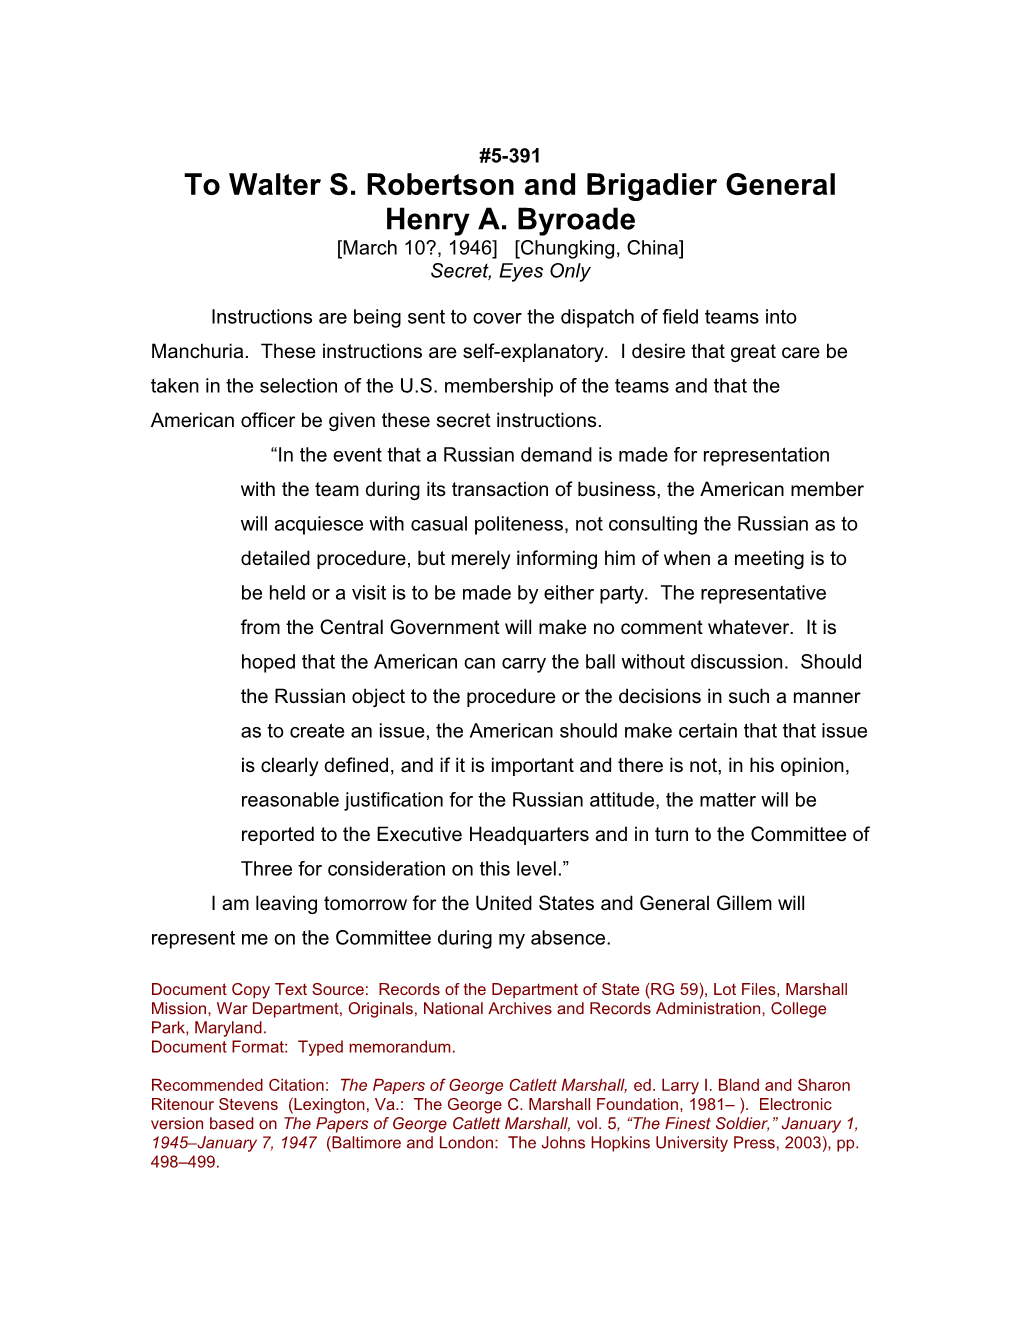 To Walter S. Robertson and Brigadier General Henry A. Byroade